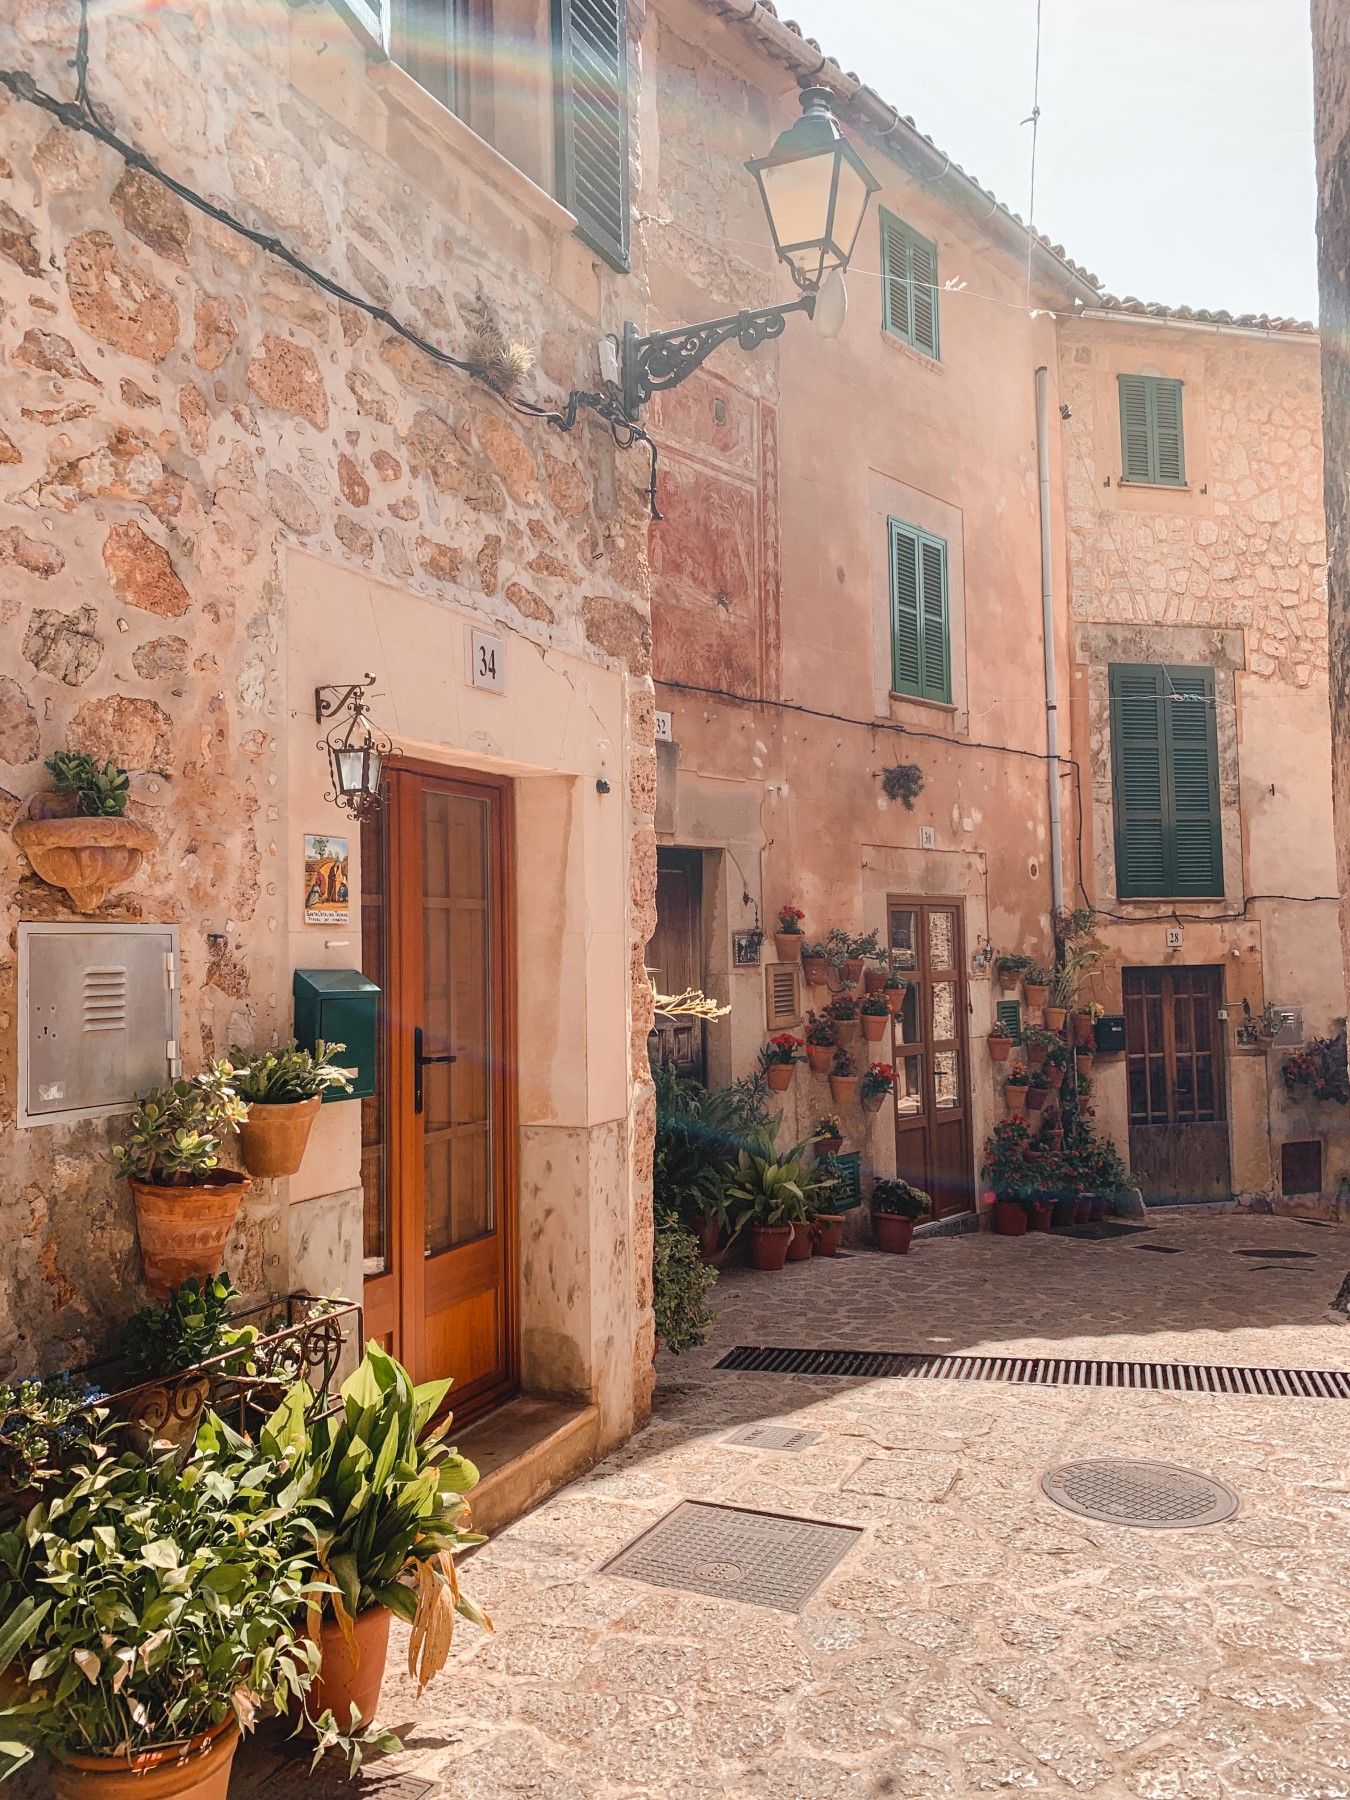 The 10 Most Instagrammable Spots In Mallorca | lifestyletraveler.co | IG: @lifestyletraveler.co